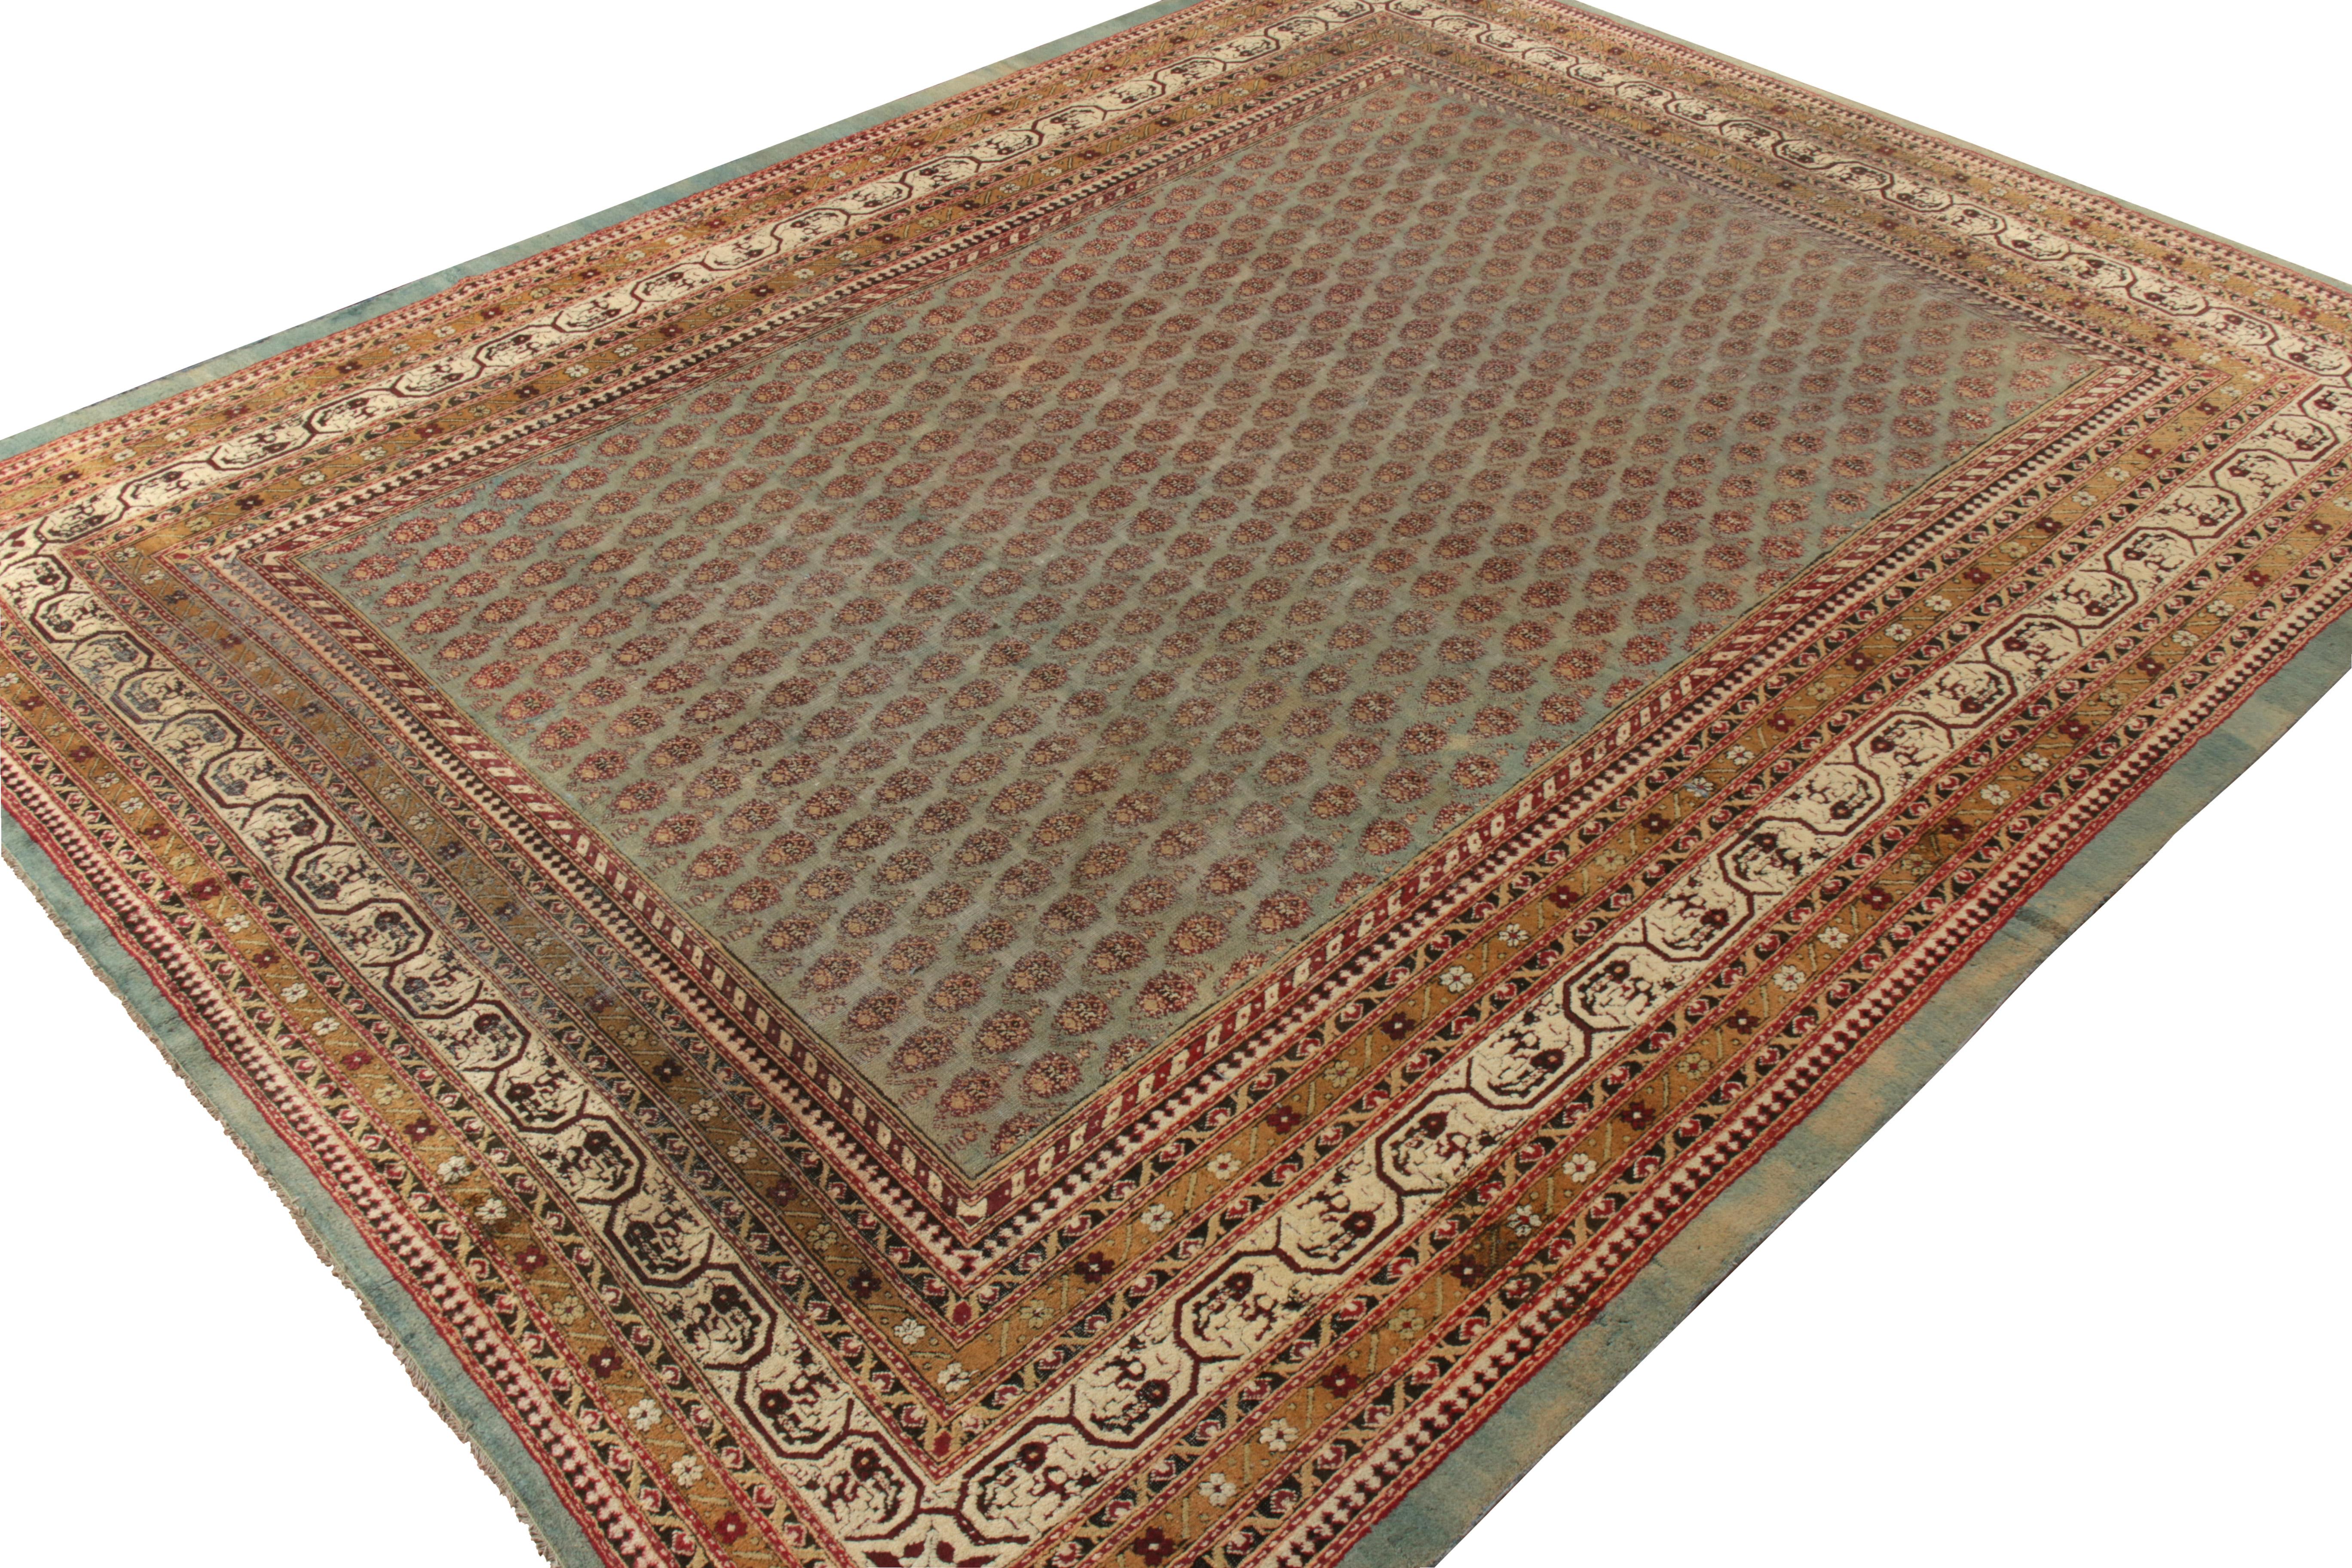 Indian Hand-Knotted Antique Amritsar Rug in Turquoise, Gold, Red Paisley Pattern